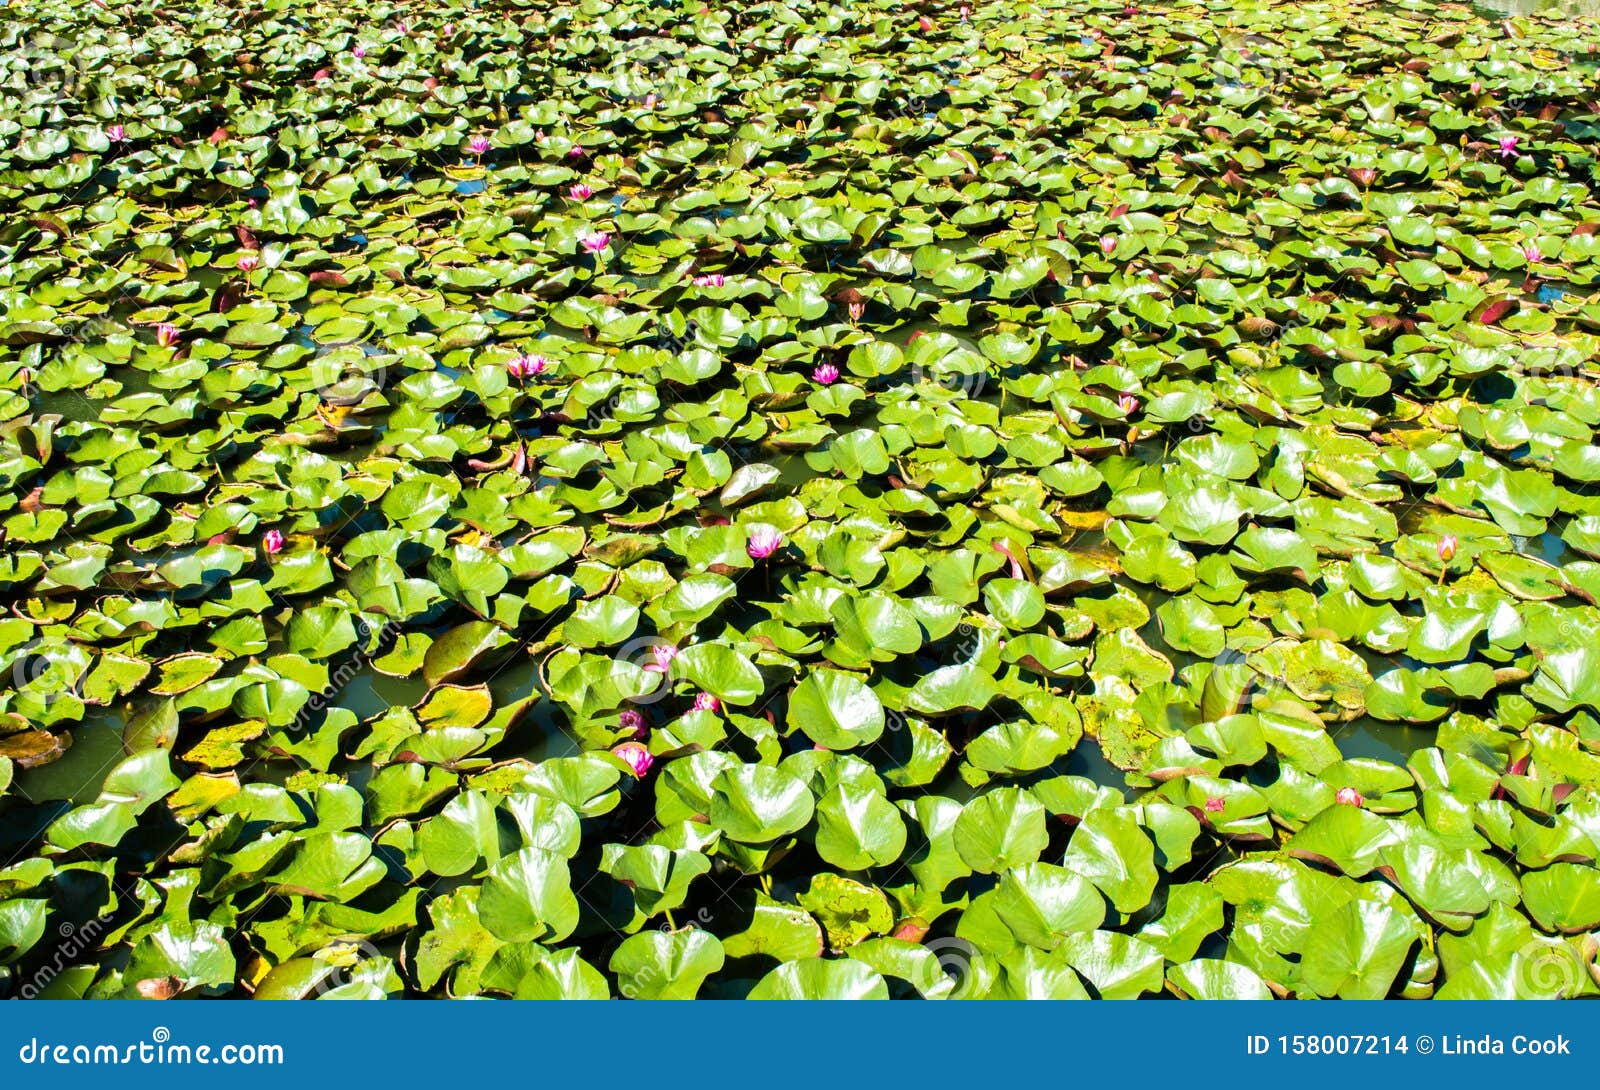 background texture - pink water lilies with green lily pads in a murky pond